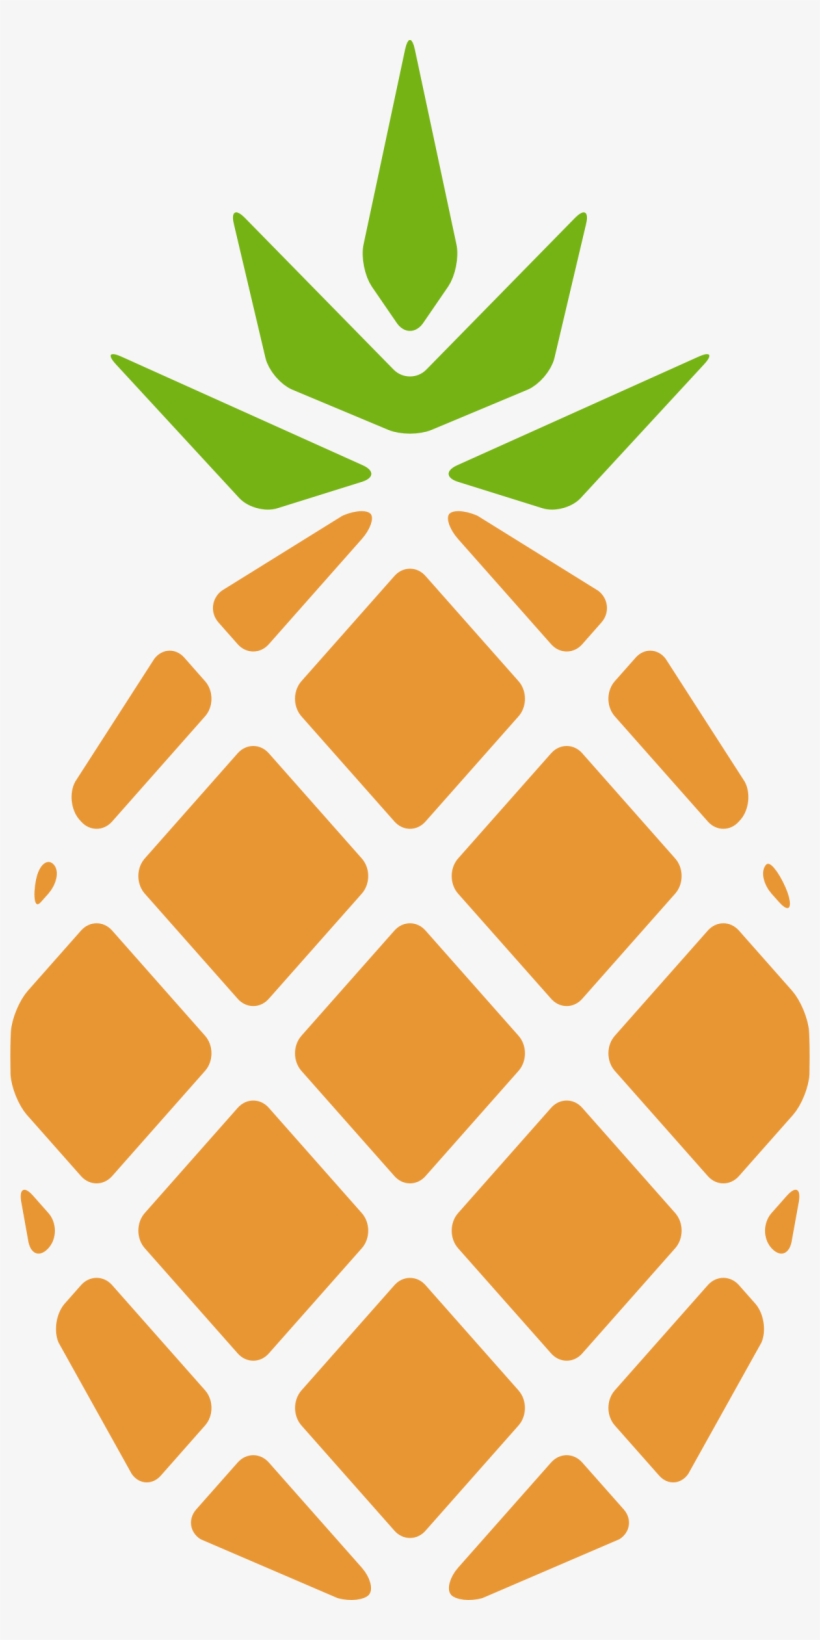 Big Image - Silhouette Pineapple Clipart Png, transparent png #9605996